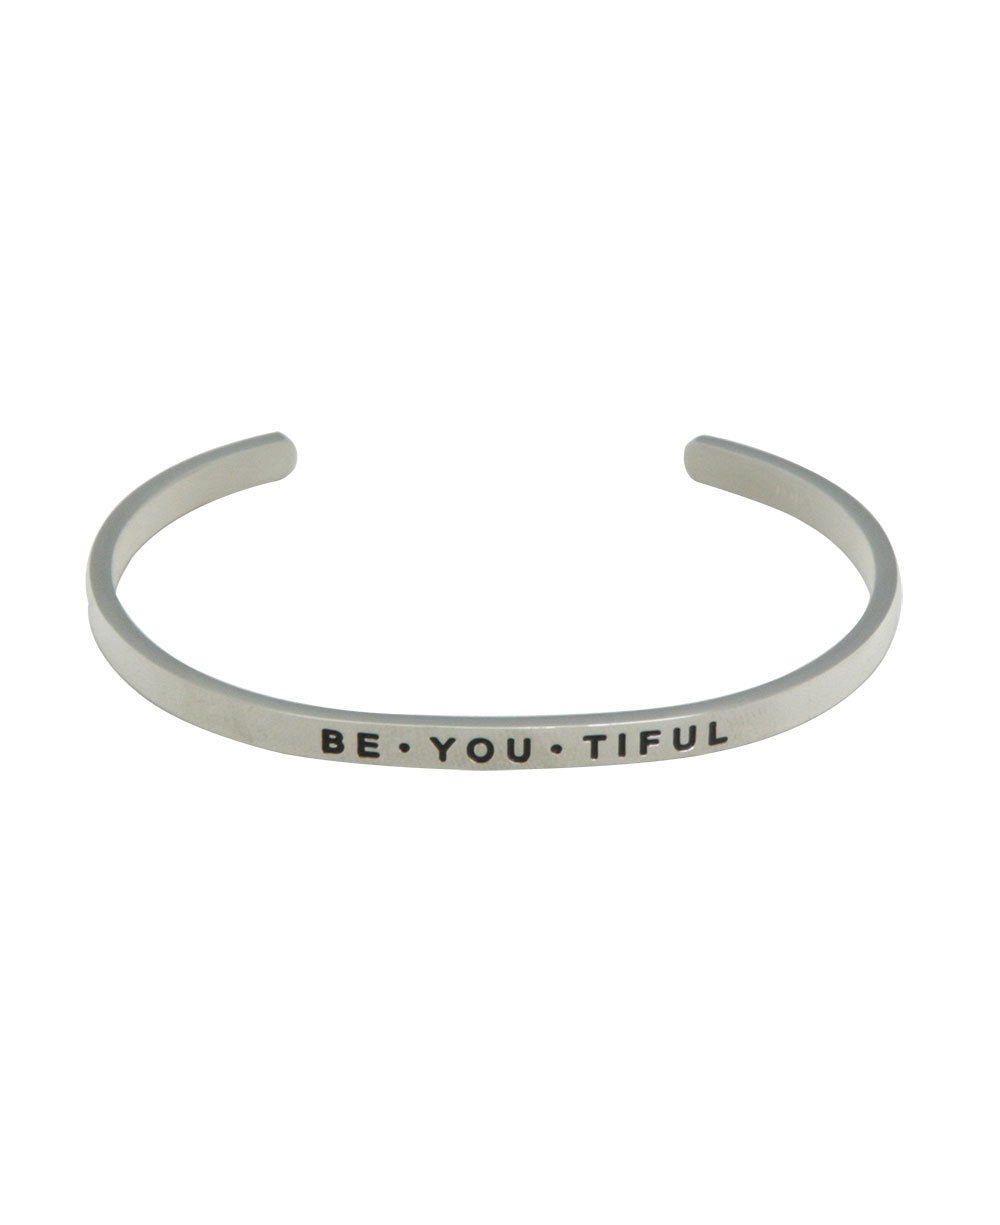 Be-you-tiful Engraved Cuff Bracelet -